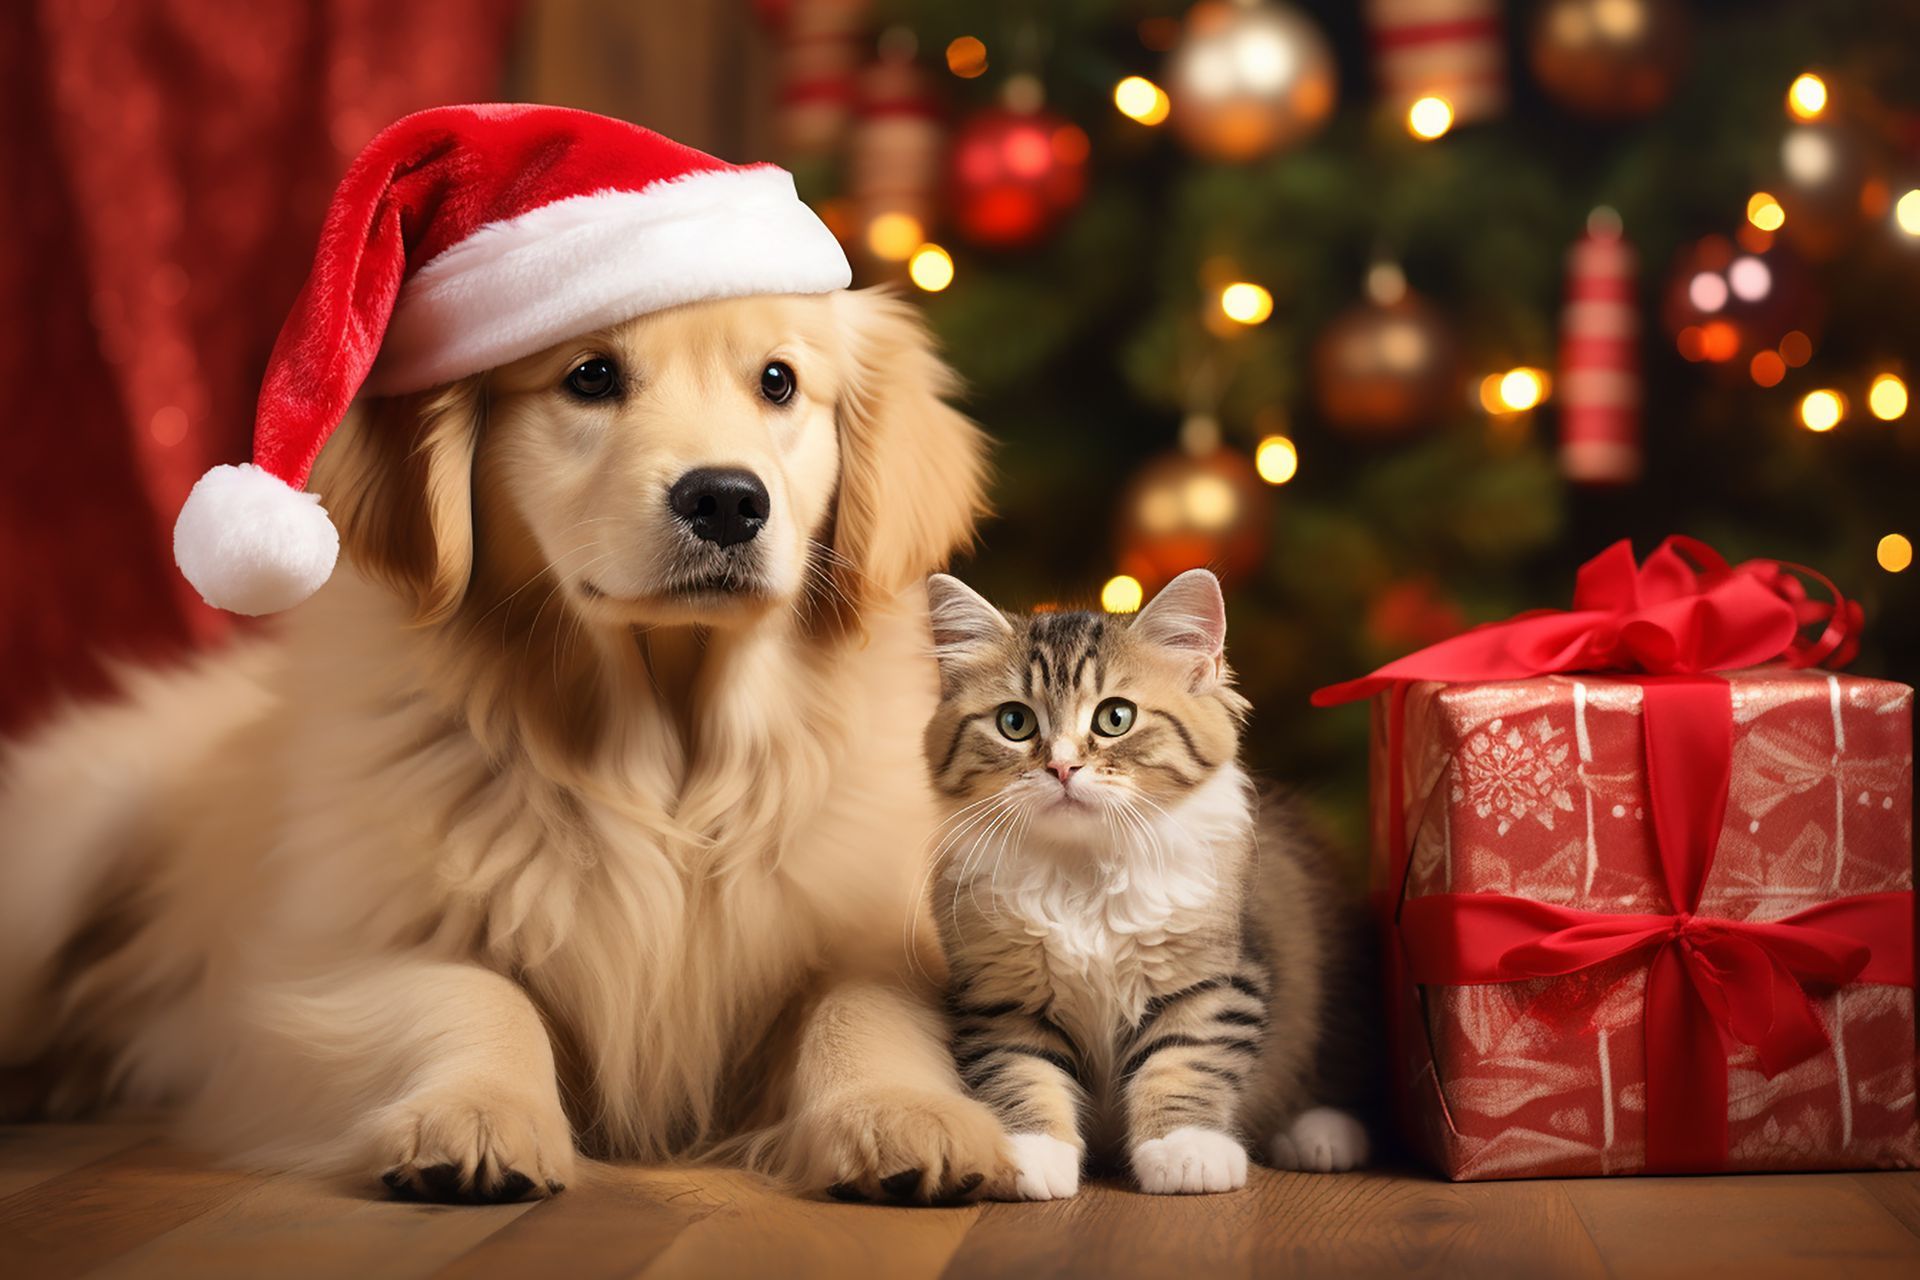 cute dog and cat wearing Christmas attire